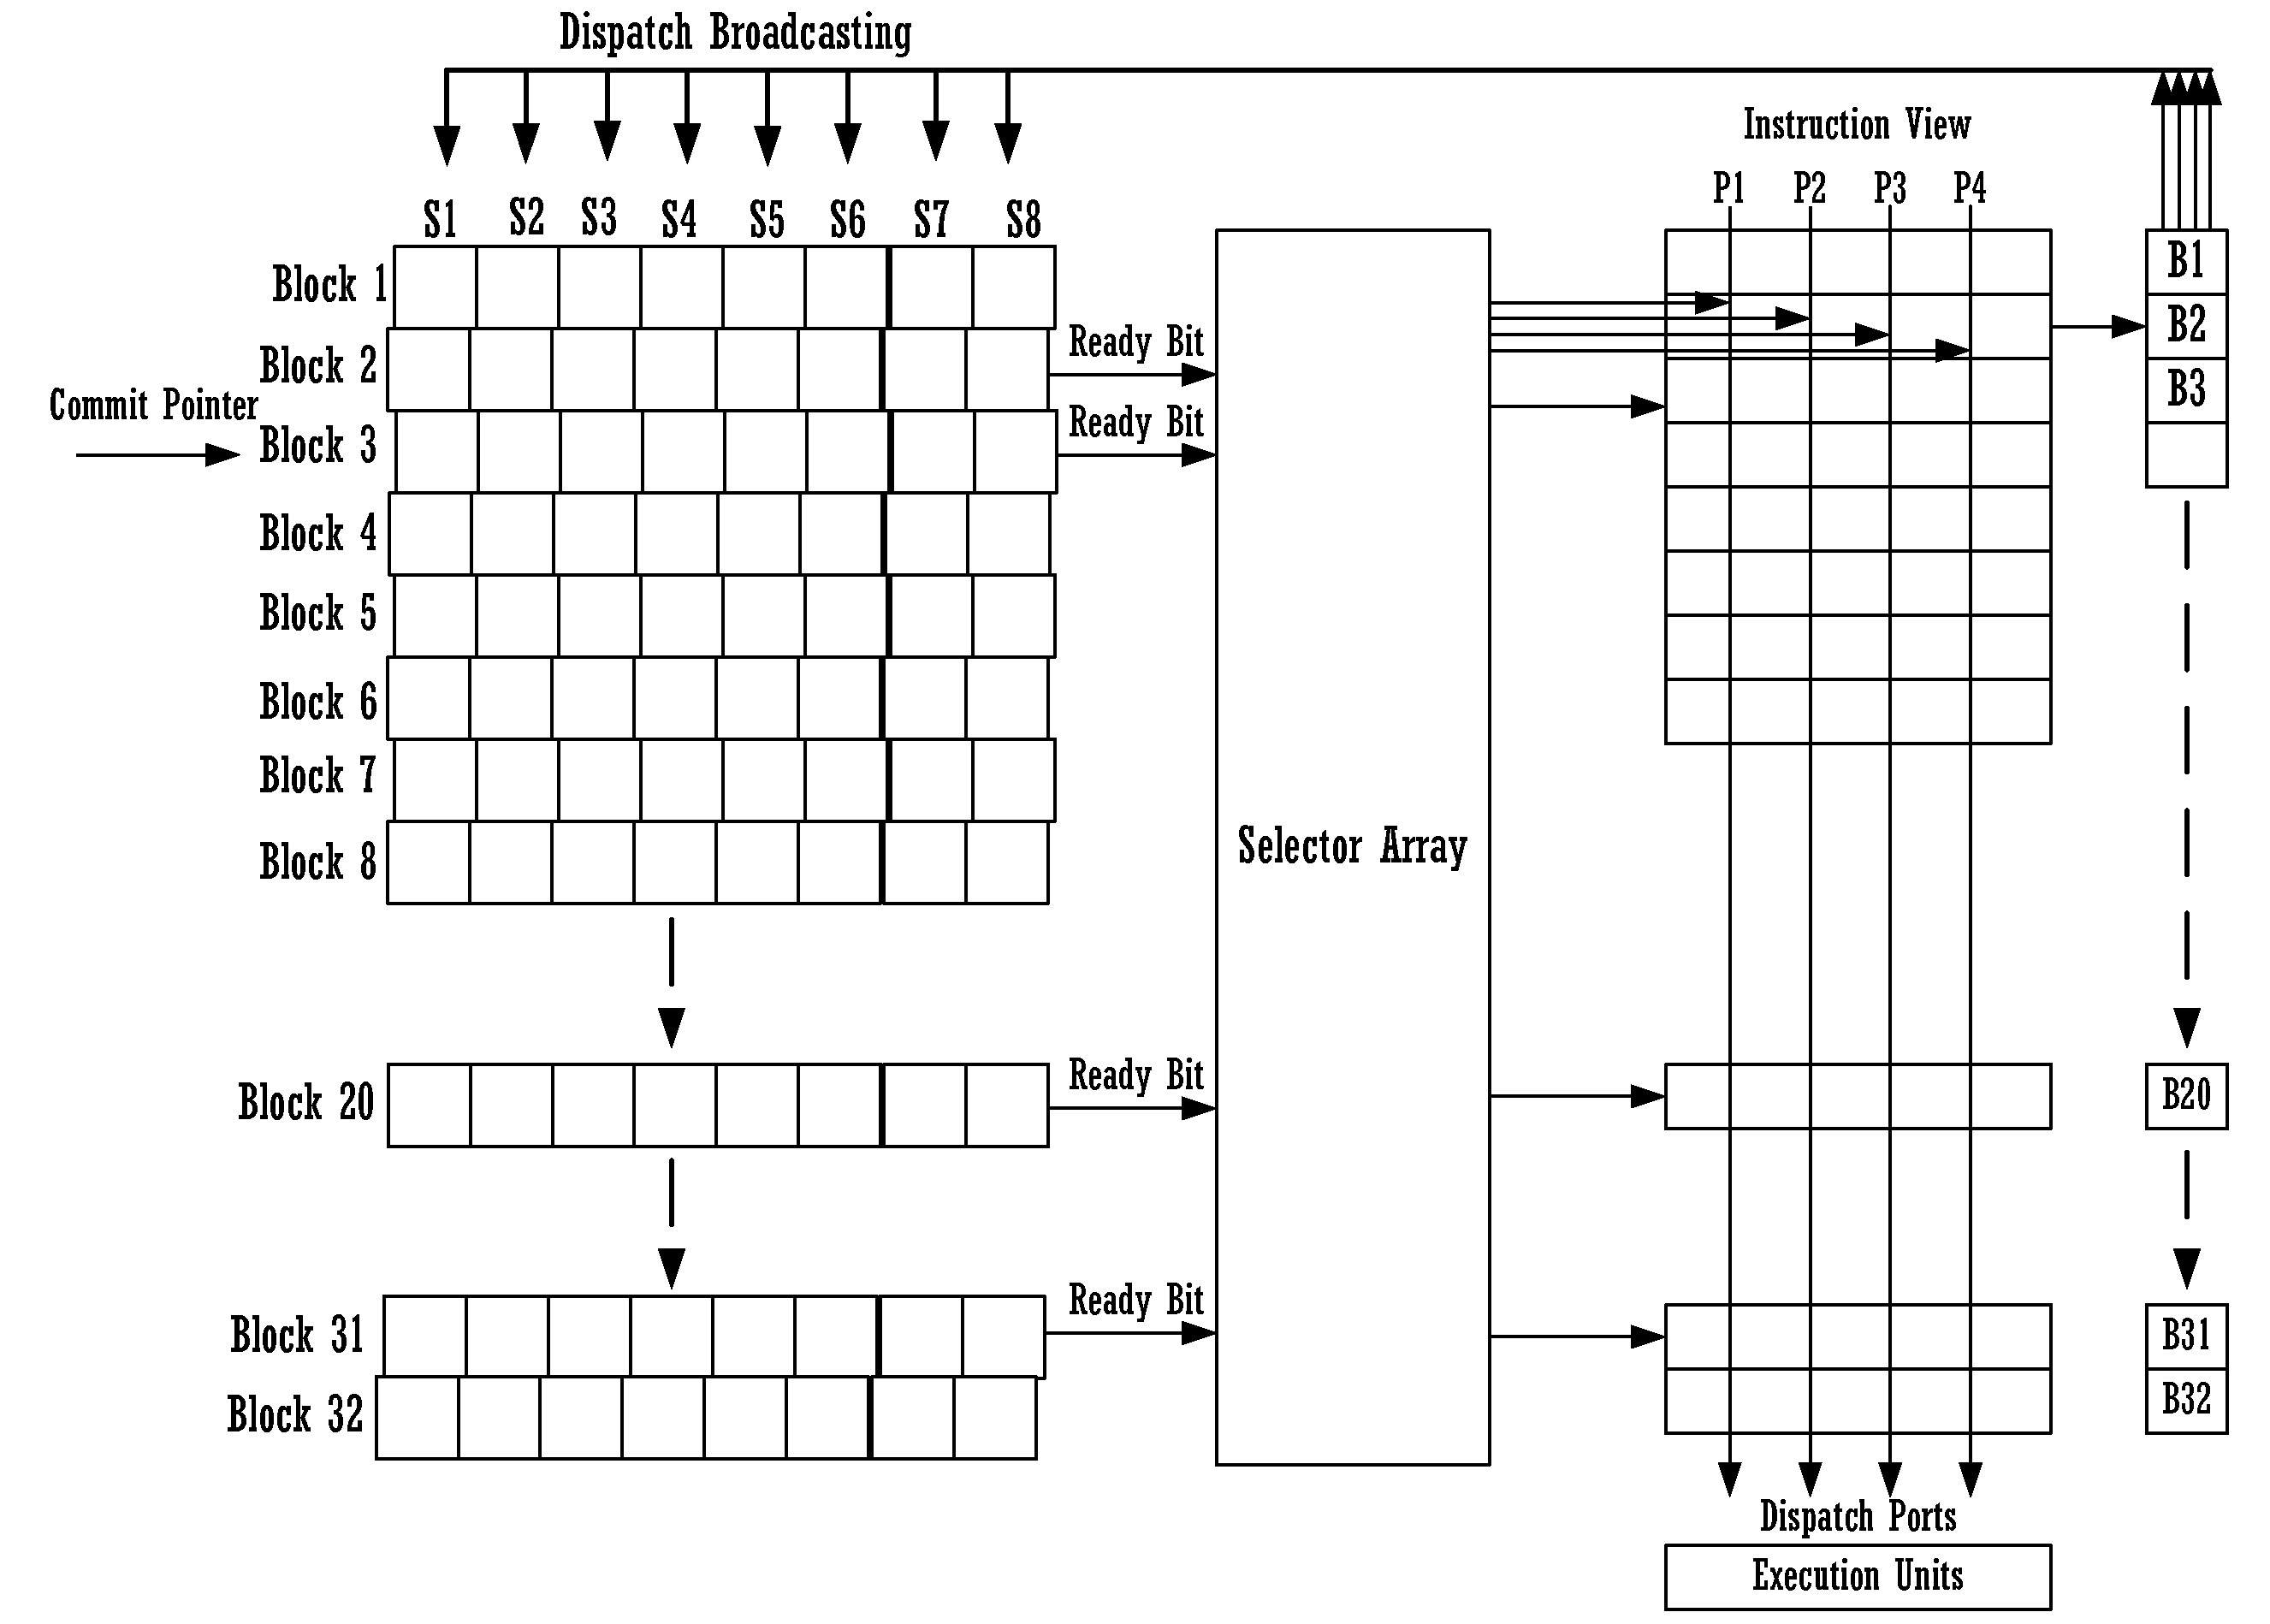 Method for executing blocks of instructions using a microprocessor architecture having a register view, source view, instruction view, and a plurality of register templates